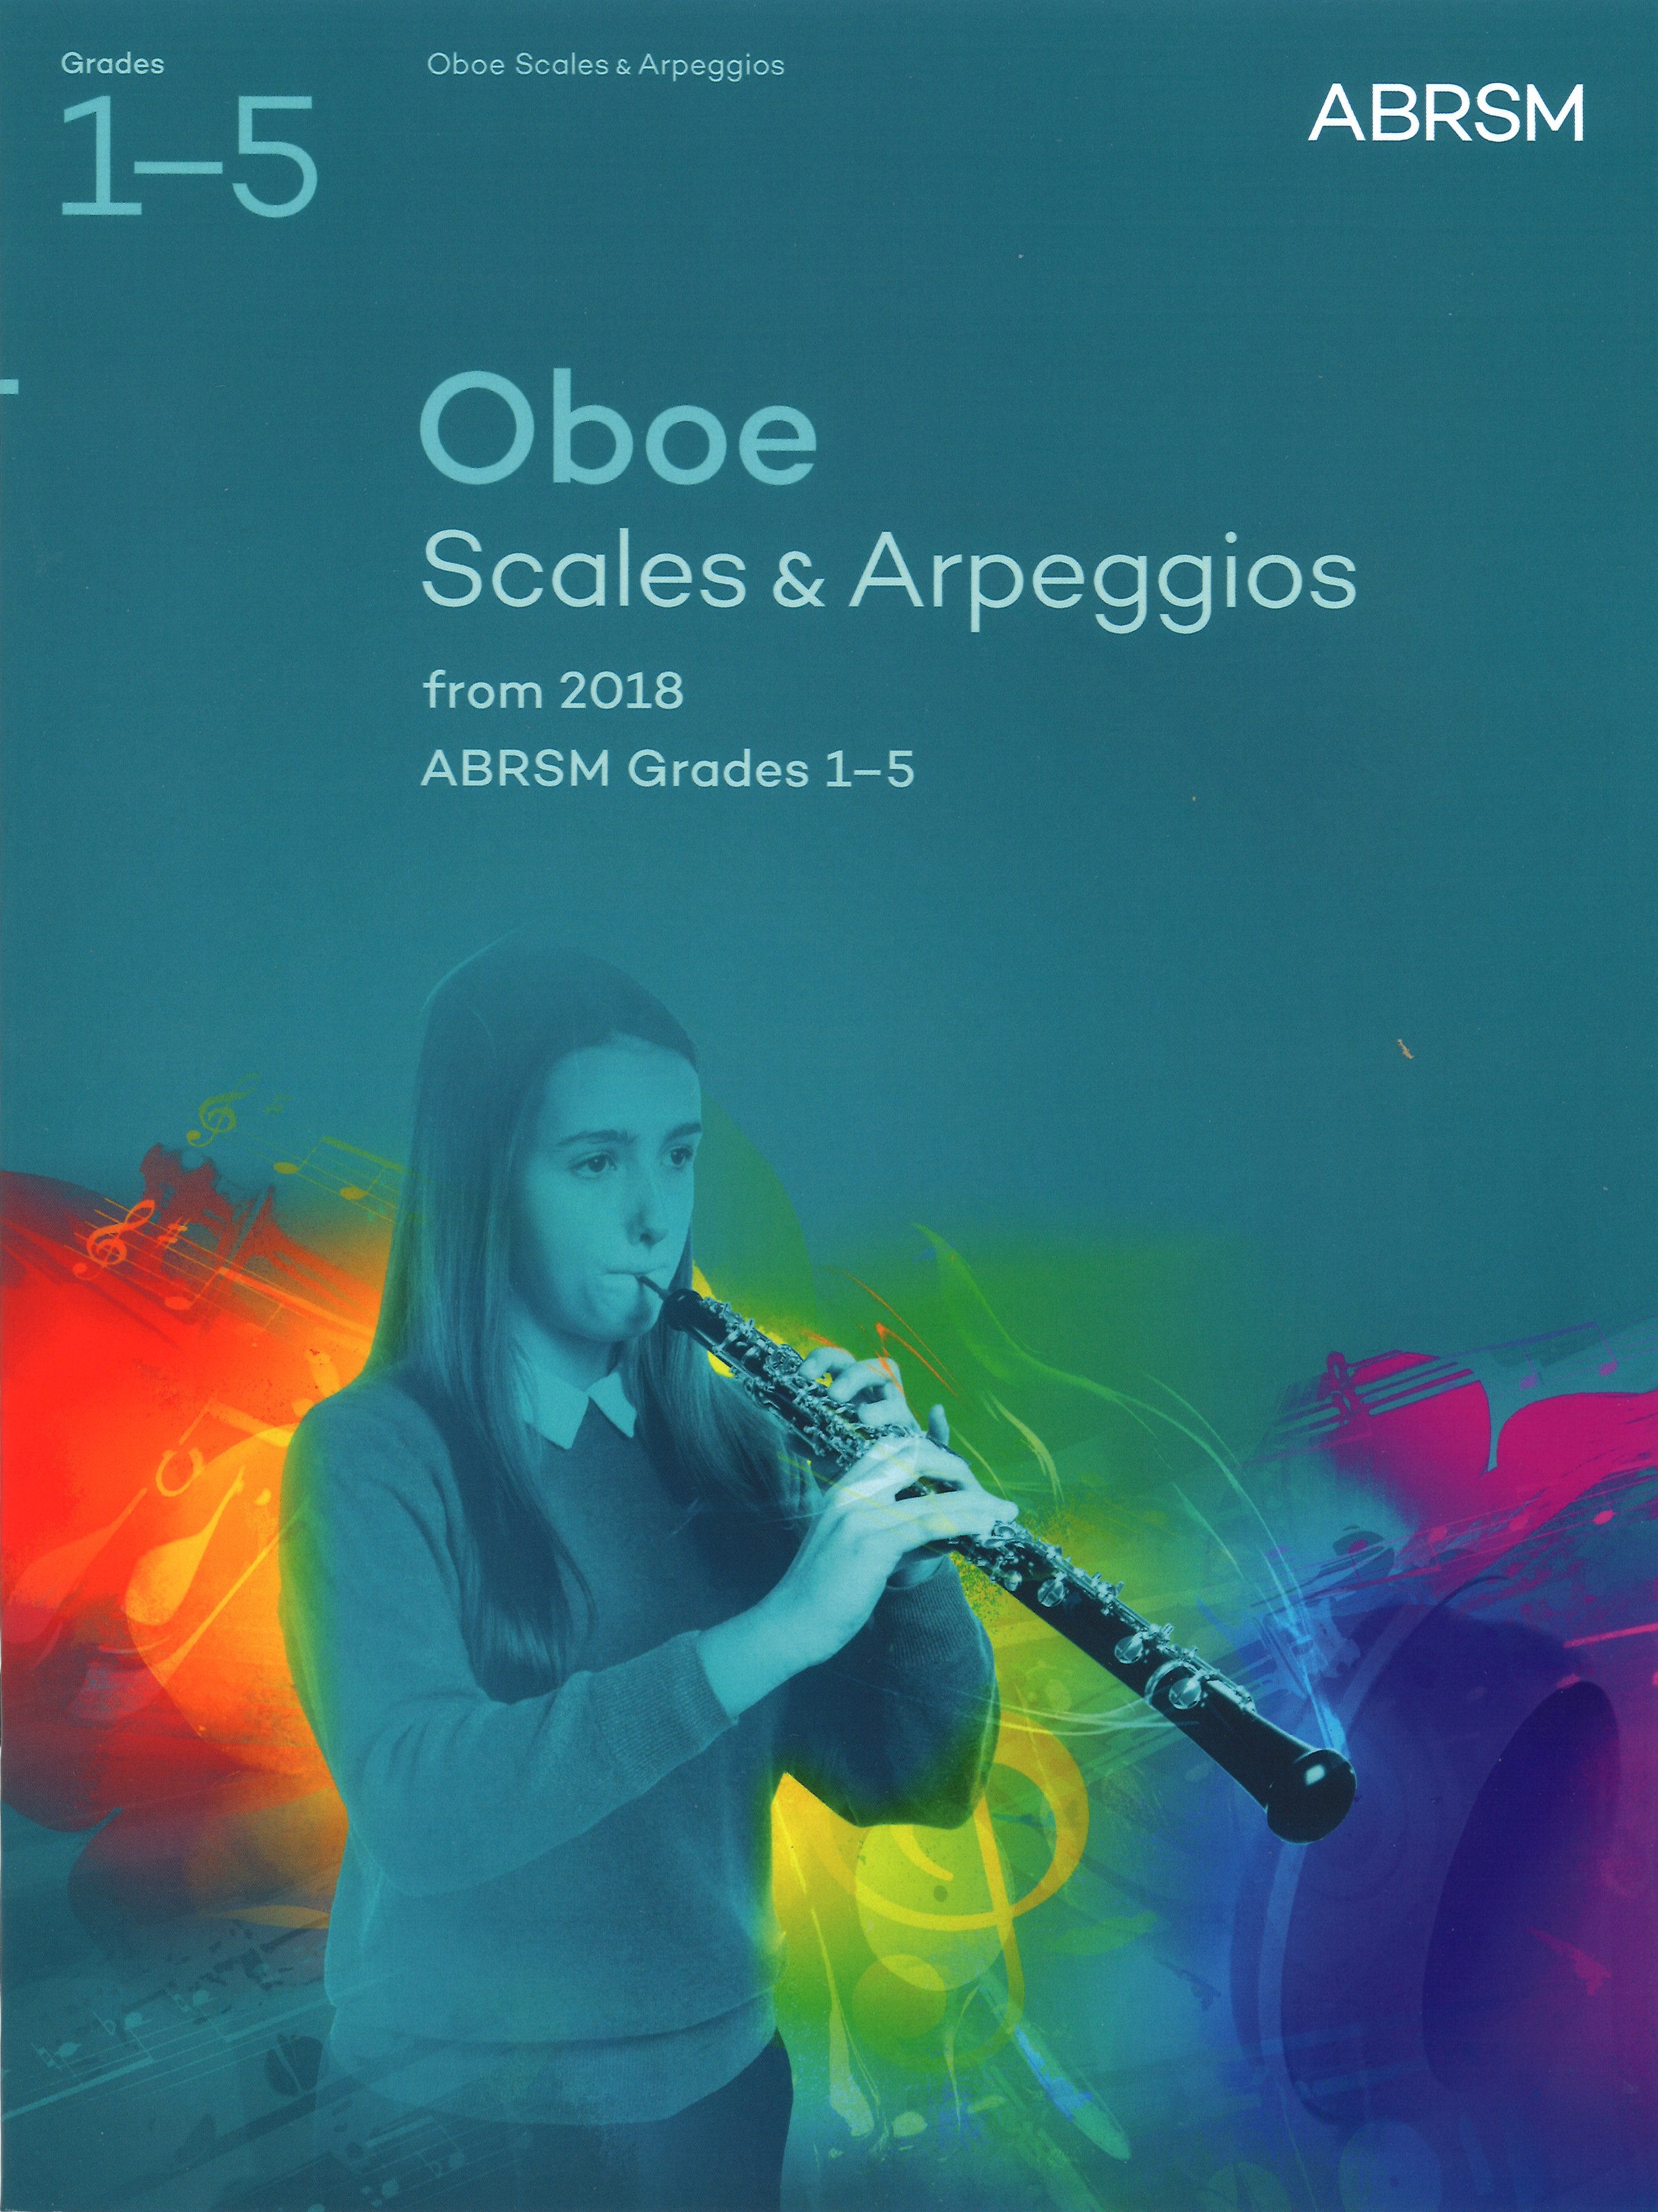 Oboe Scales & Arpeggios From 2018 Grade 1-5 Abrsm Sheet Music Songbook